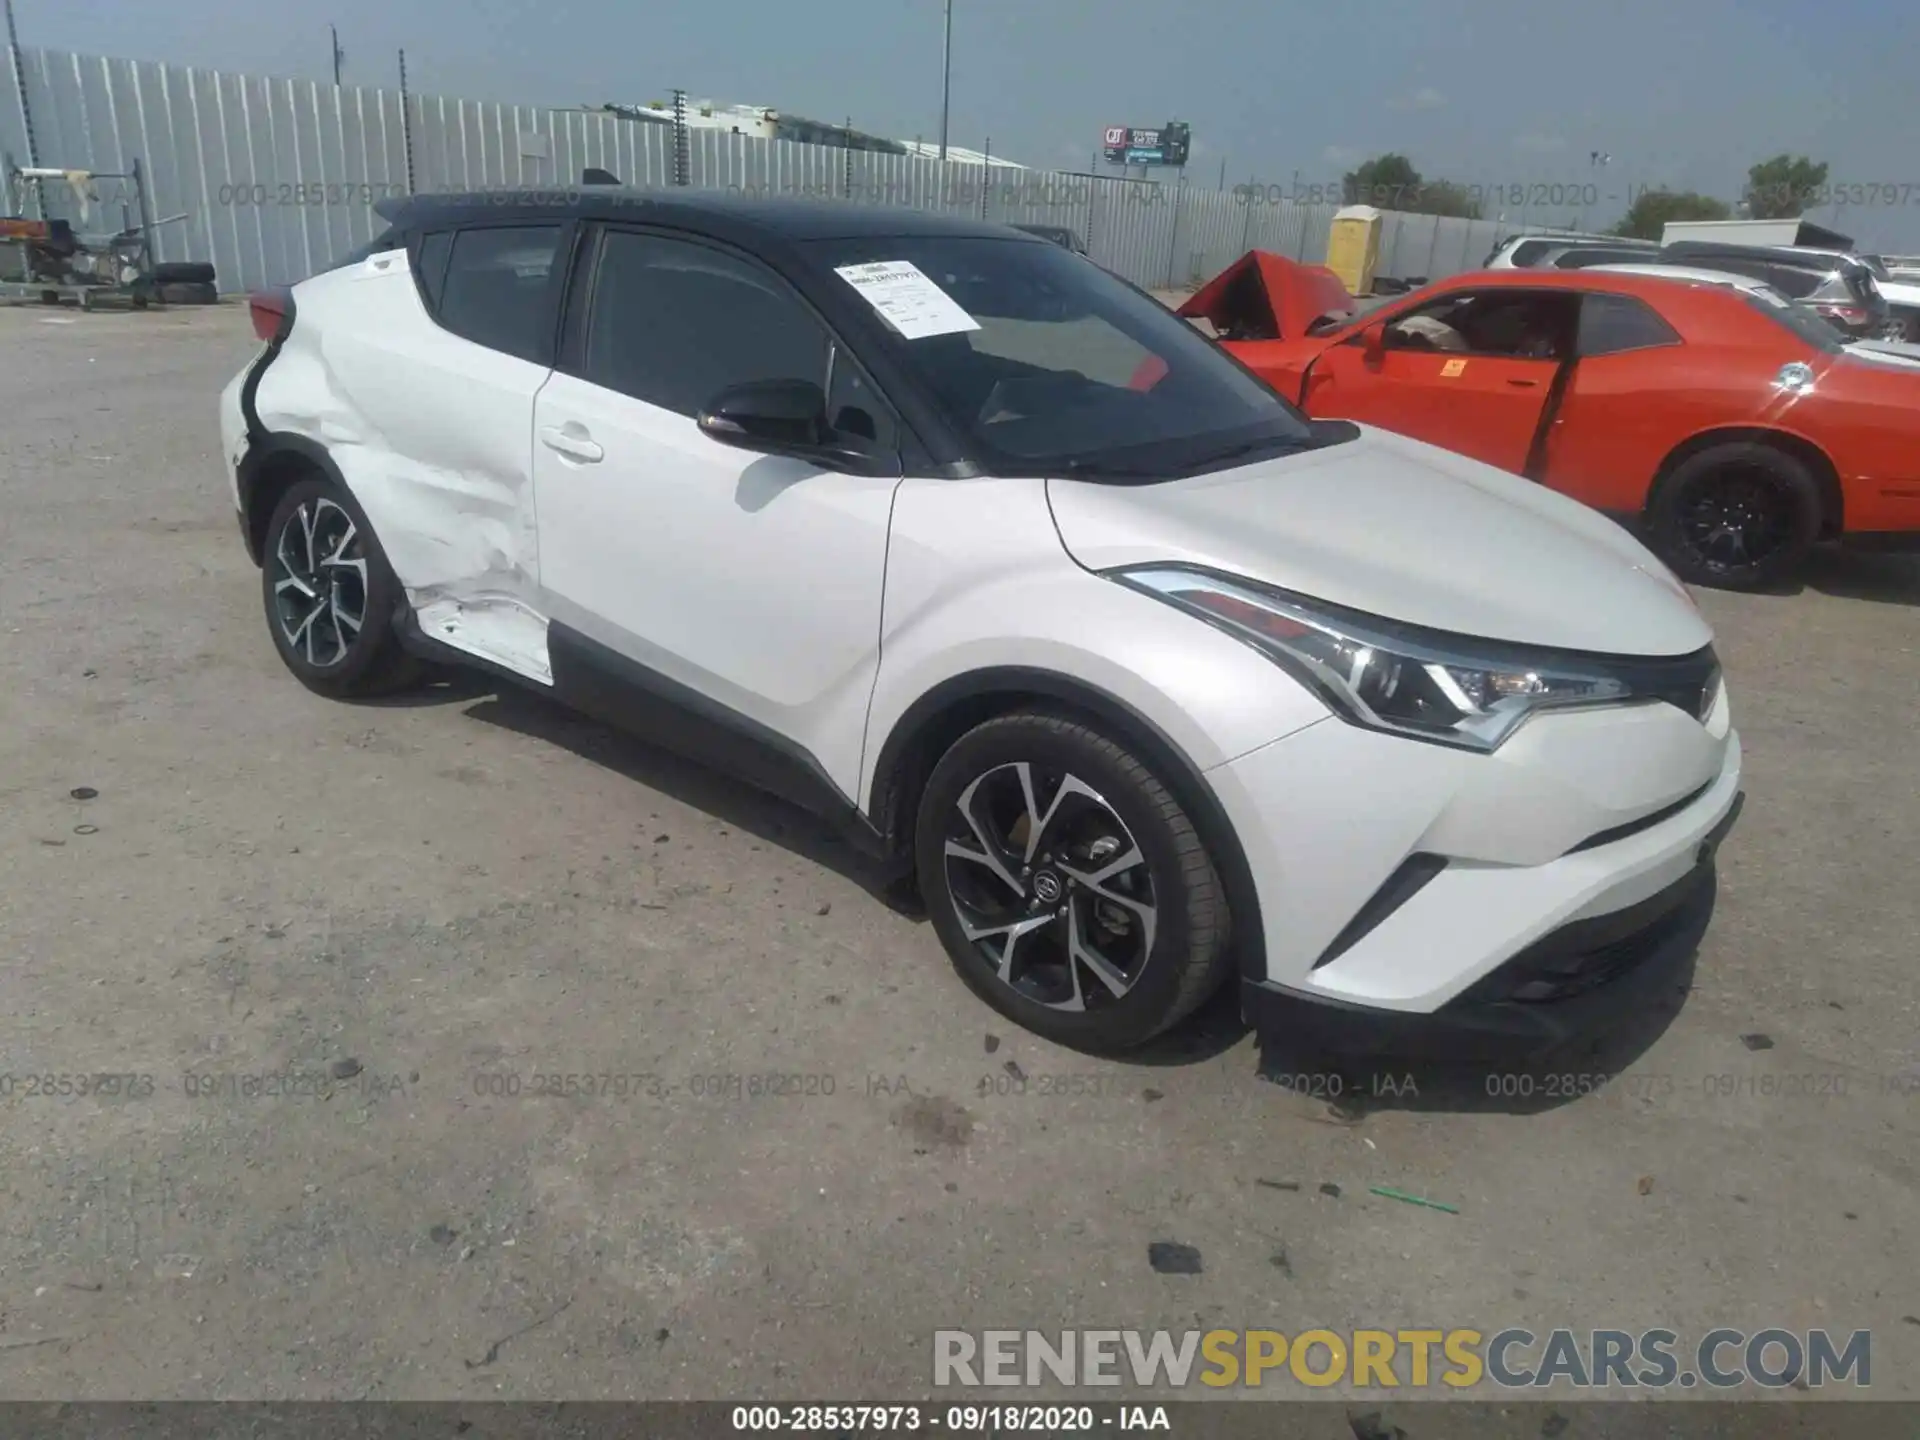 1 Photograph of a damaged car NMTKHMBXXKR085298 TOYOTA C-HR 2019